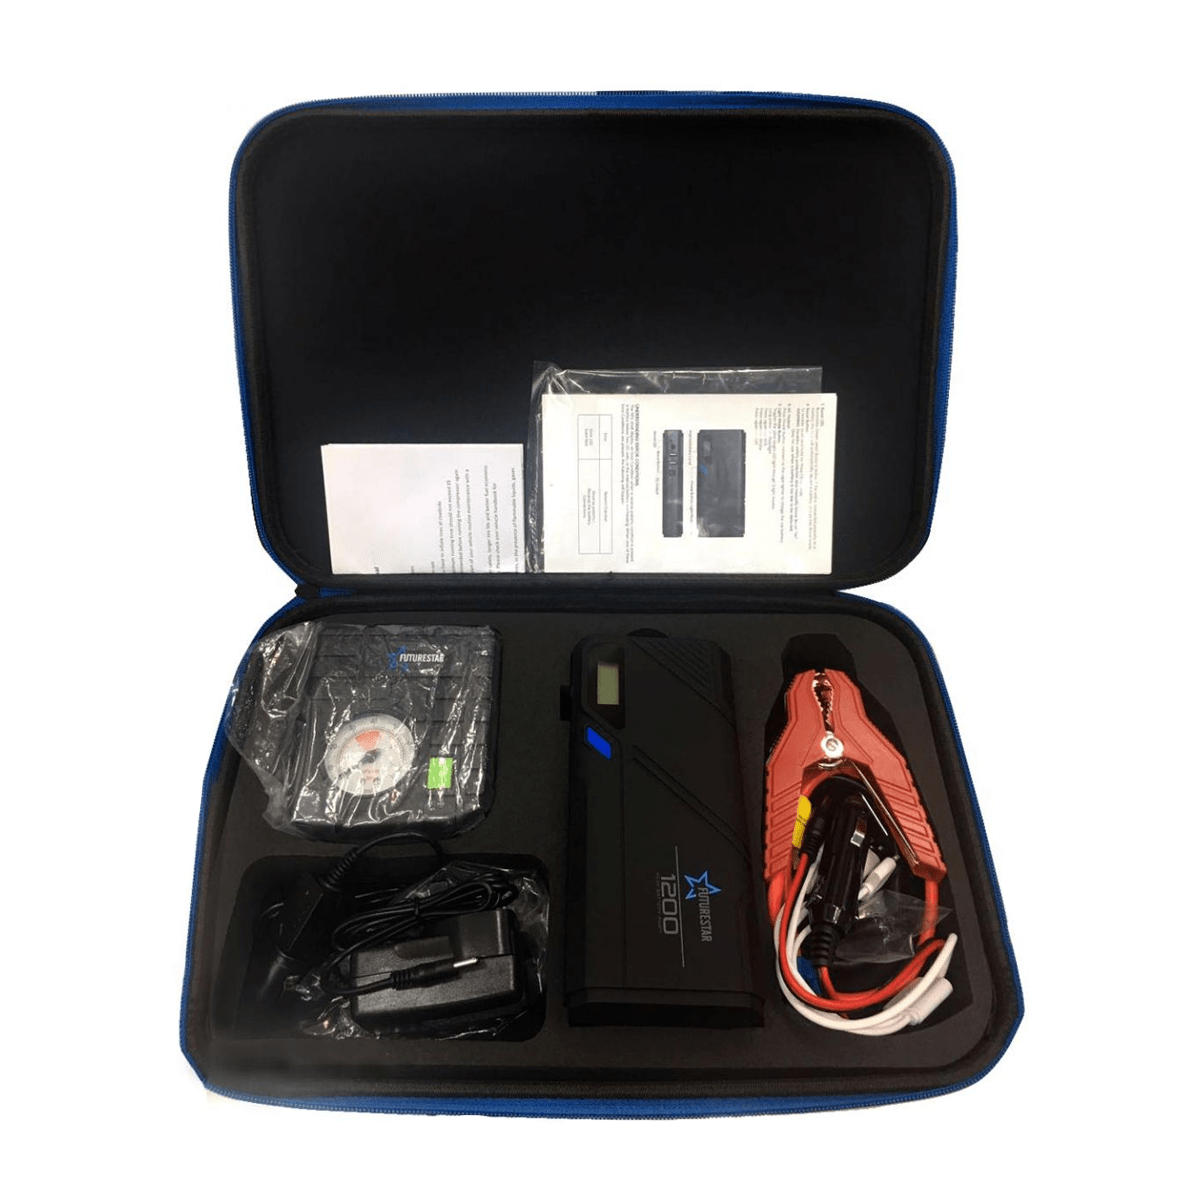 NO1 Kadi Star Auto Car Jump Starter and All in One emergency Power Bank